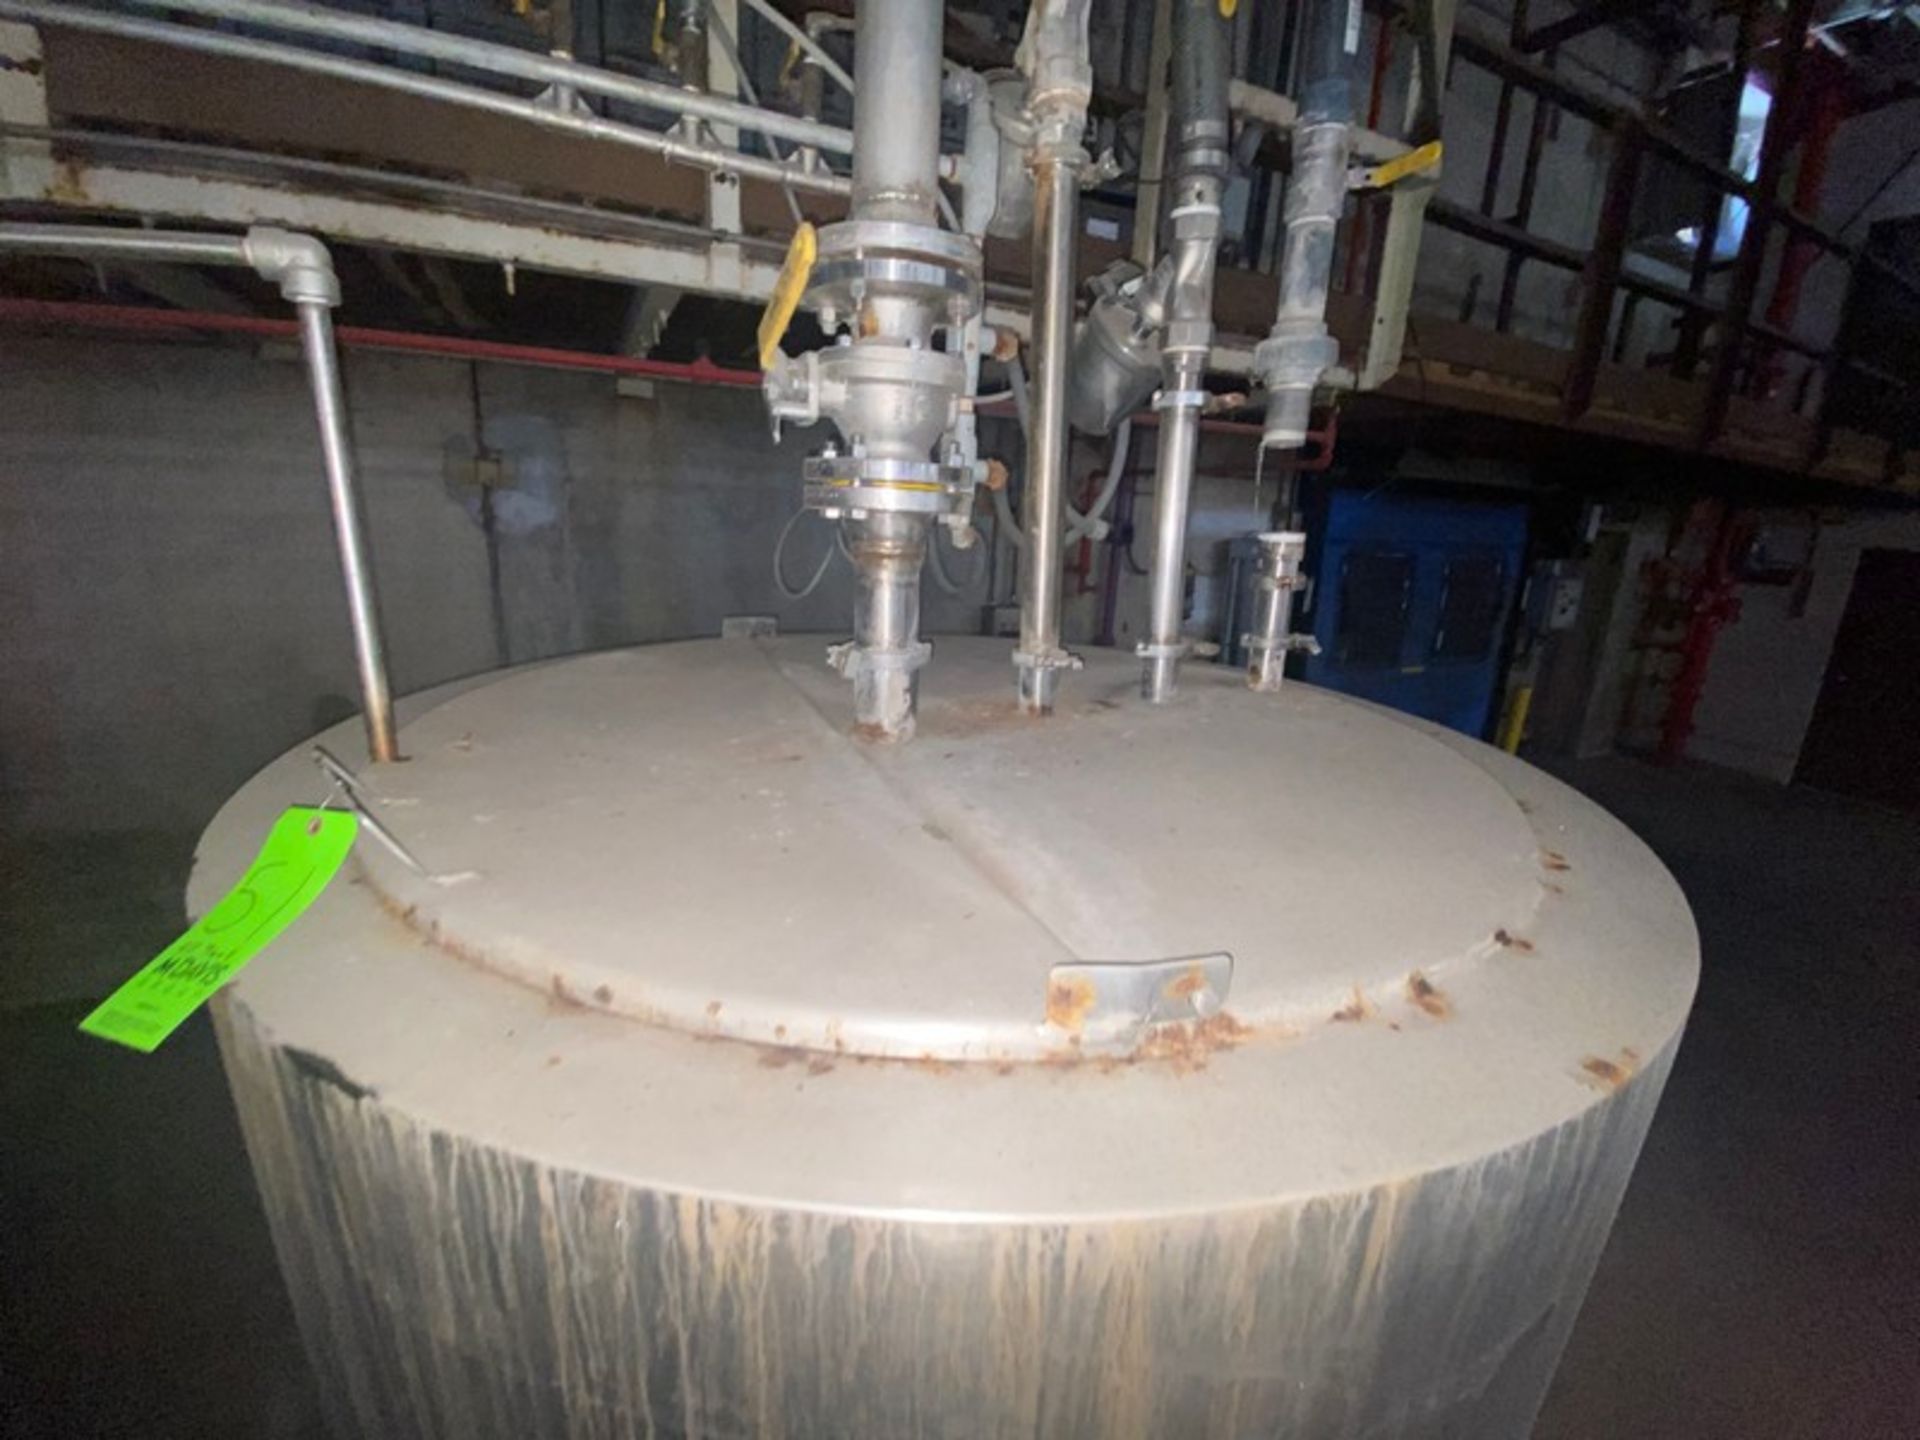 Damrow Bros. 400 Gal. S/S Vertical Insulated Tank, S/N 25609, with S/S Hinge Lid, Mounted on S/S - Image 15 of 16